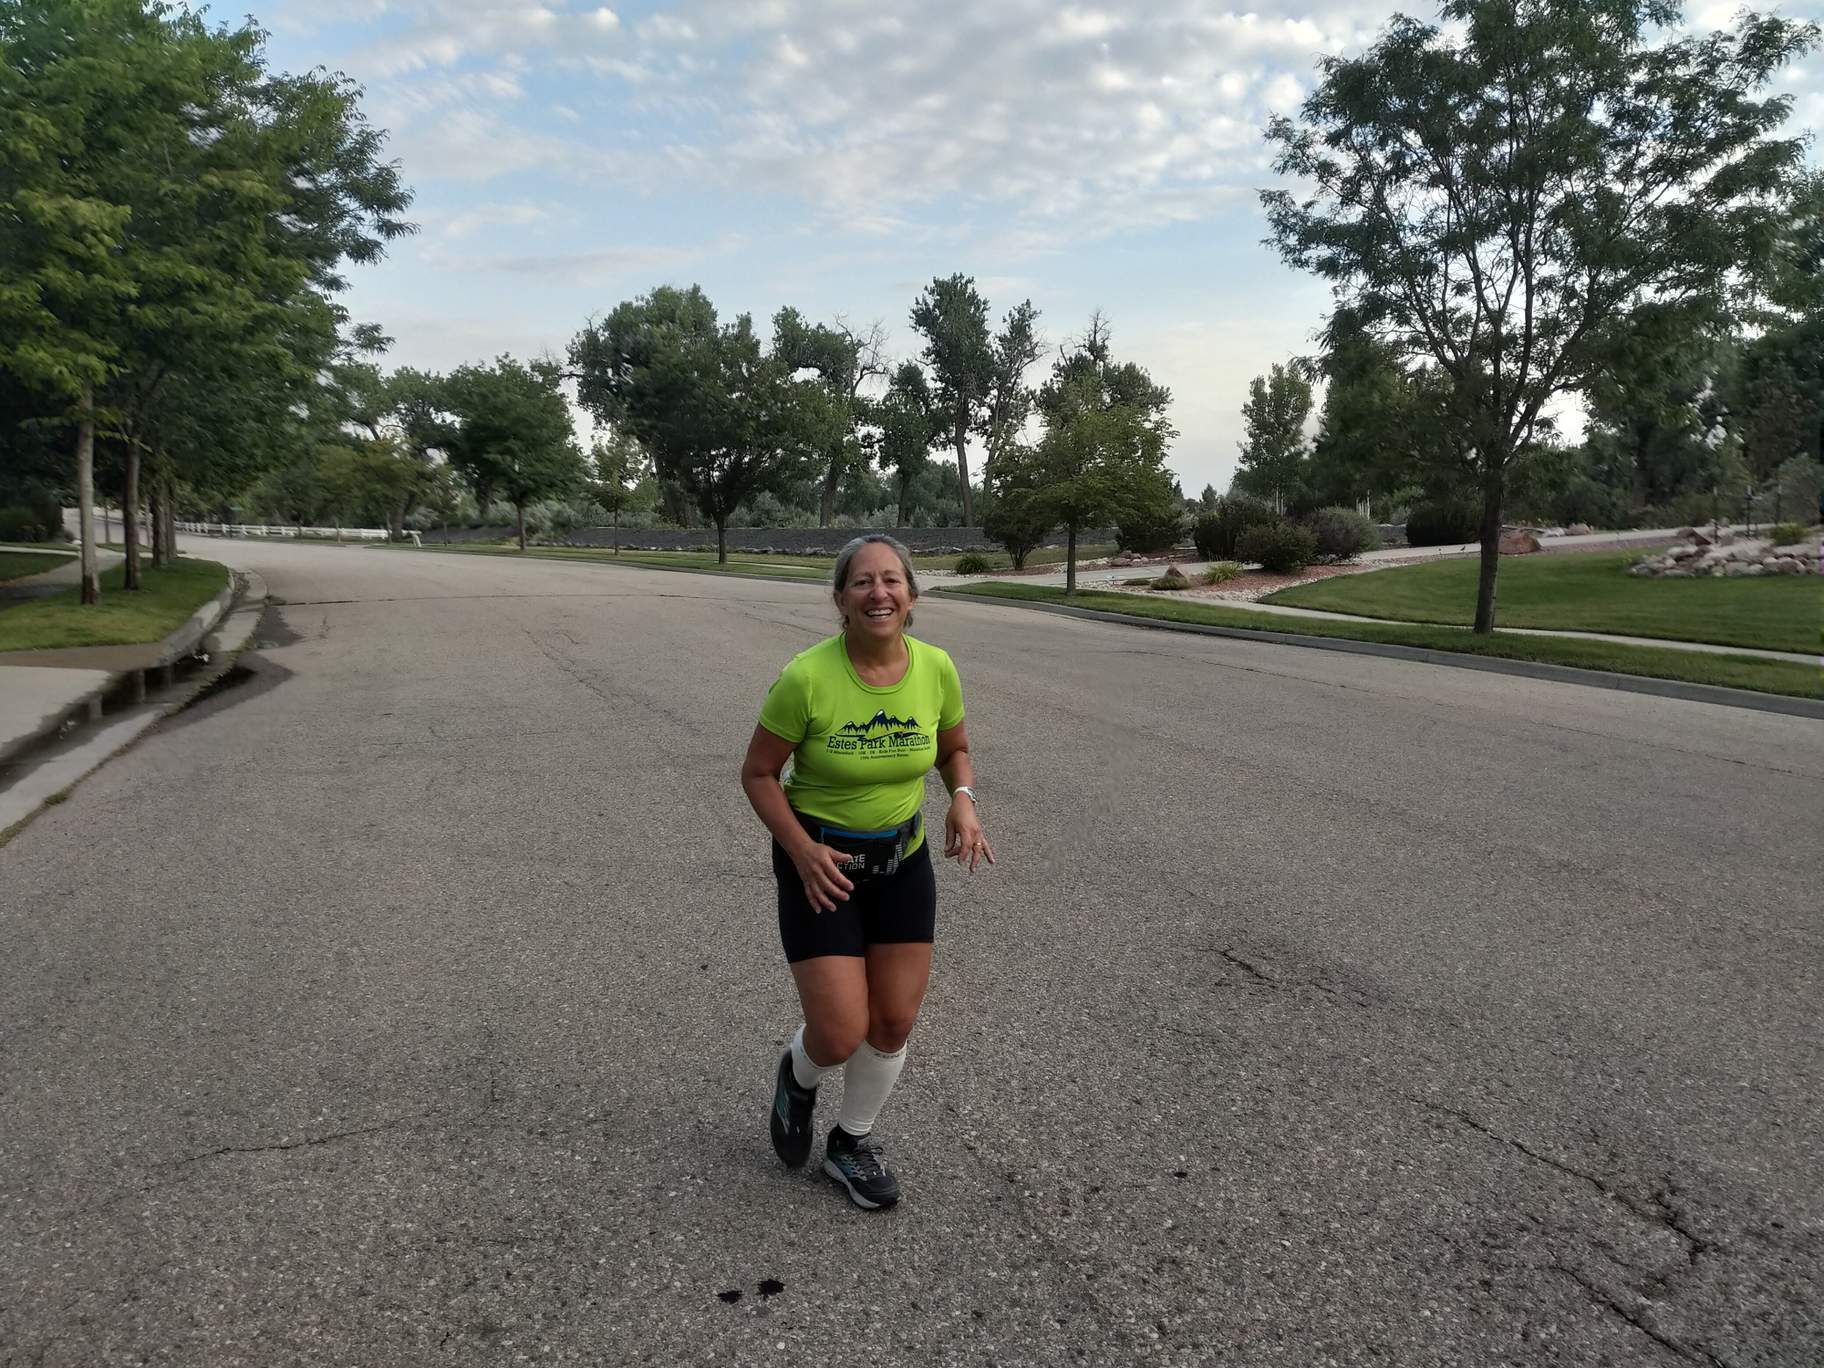 Alene Nitzky running in the Do-It-Yourself 50 Miles (DIY 50 Miles) in the Hearthfire neighborhood of Fort Collins.